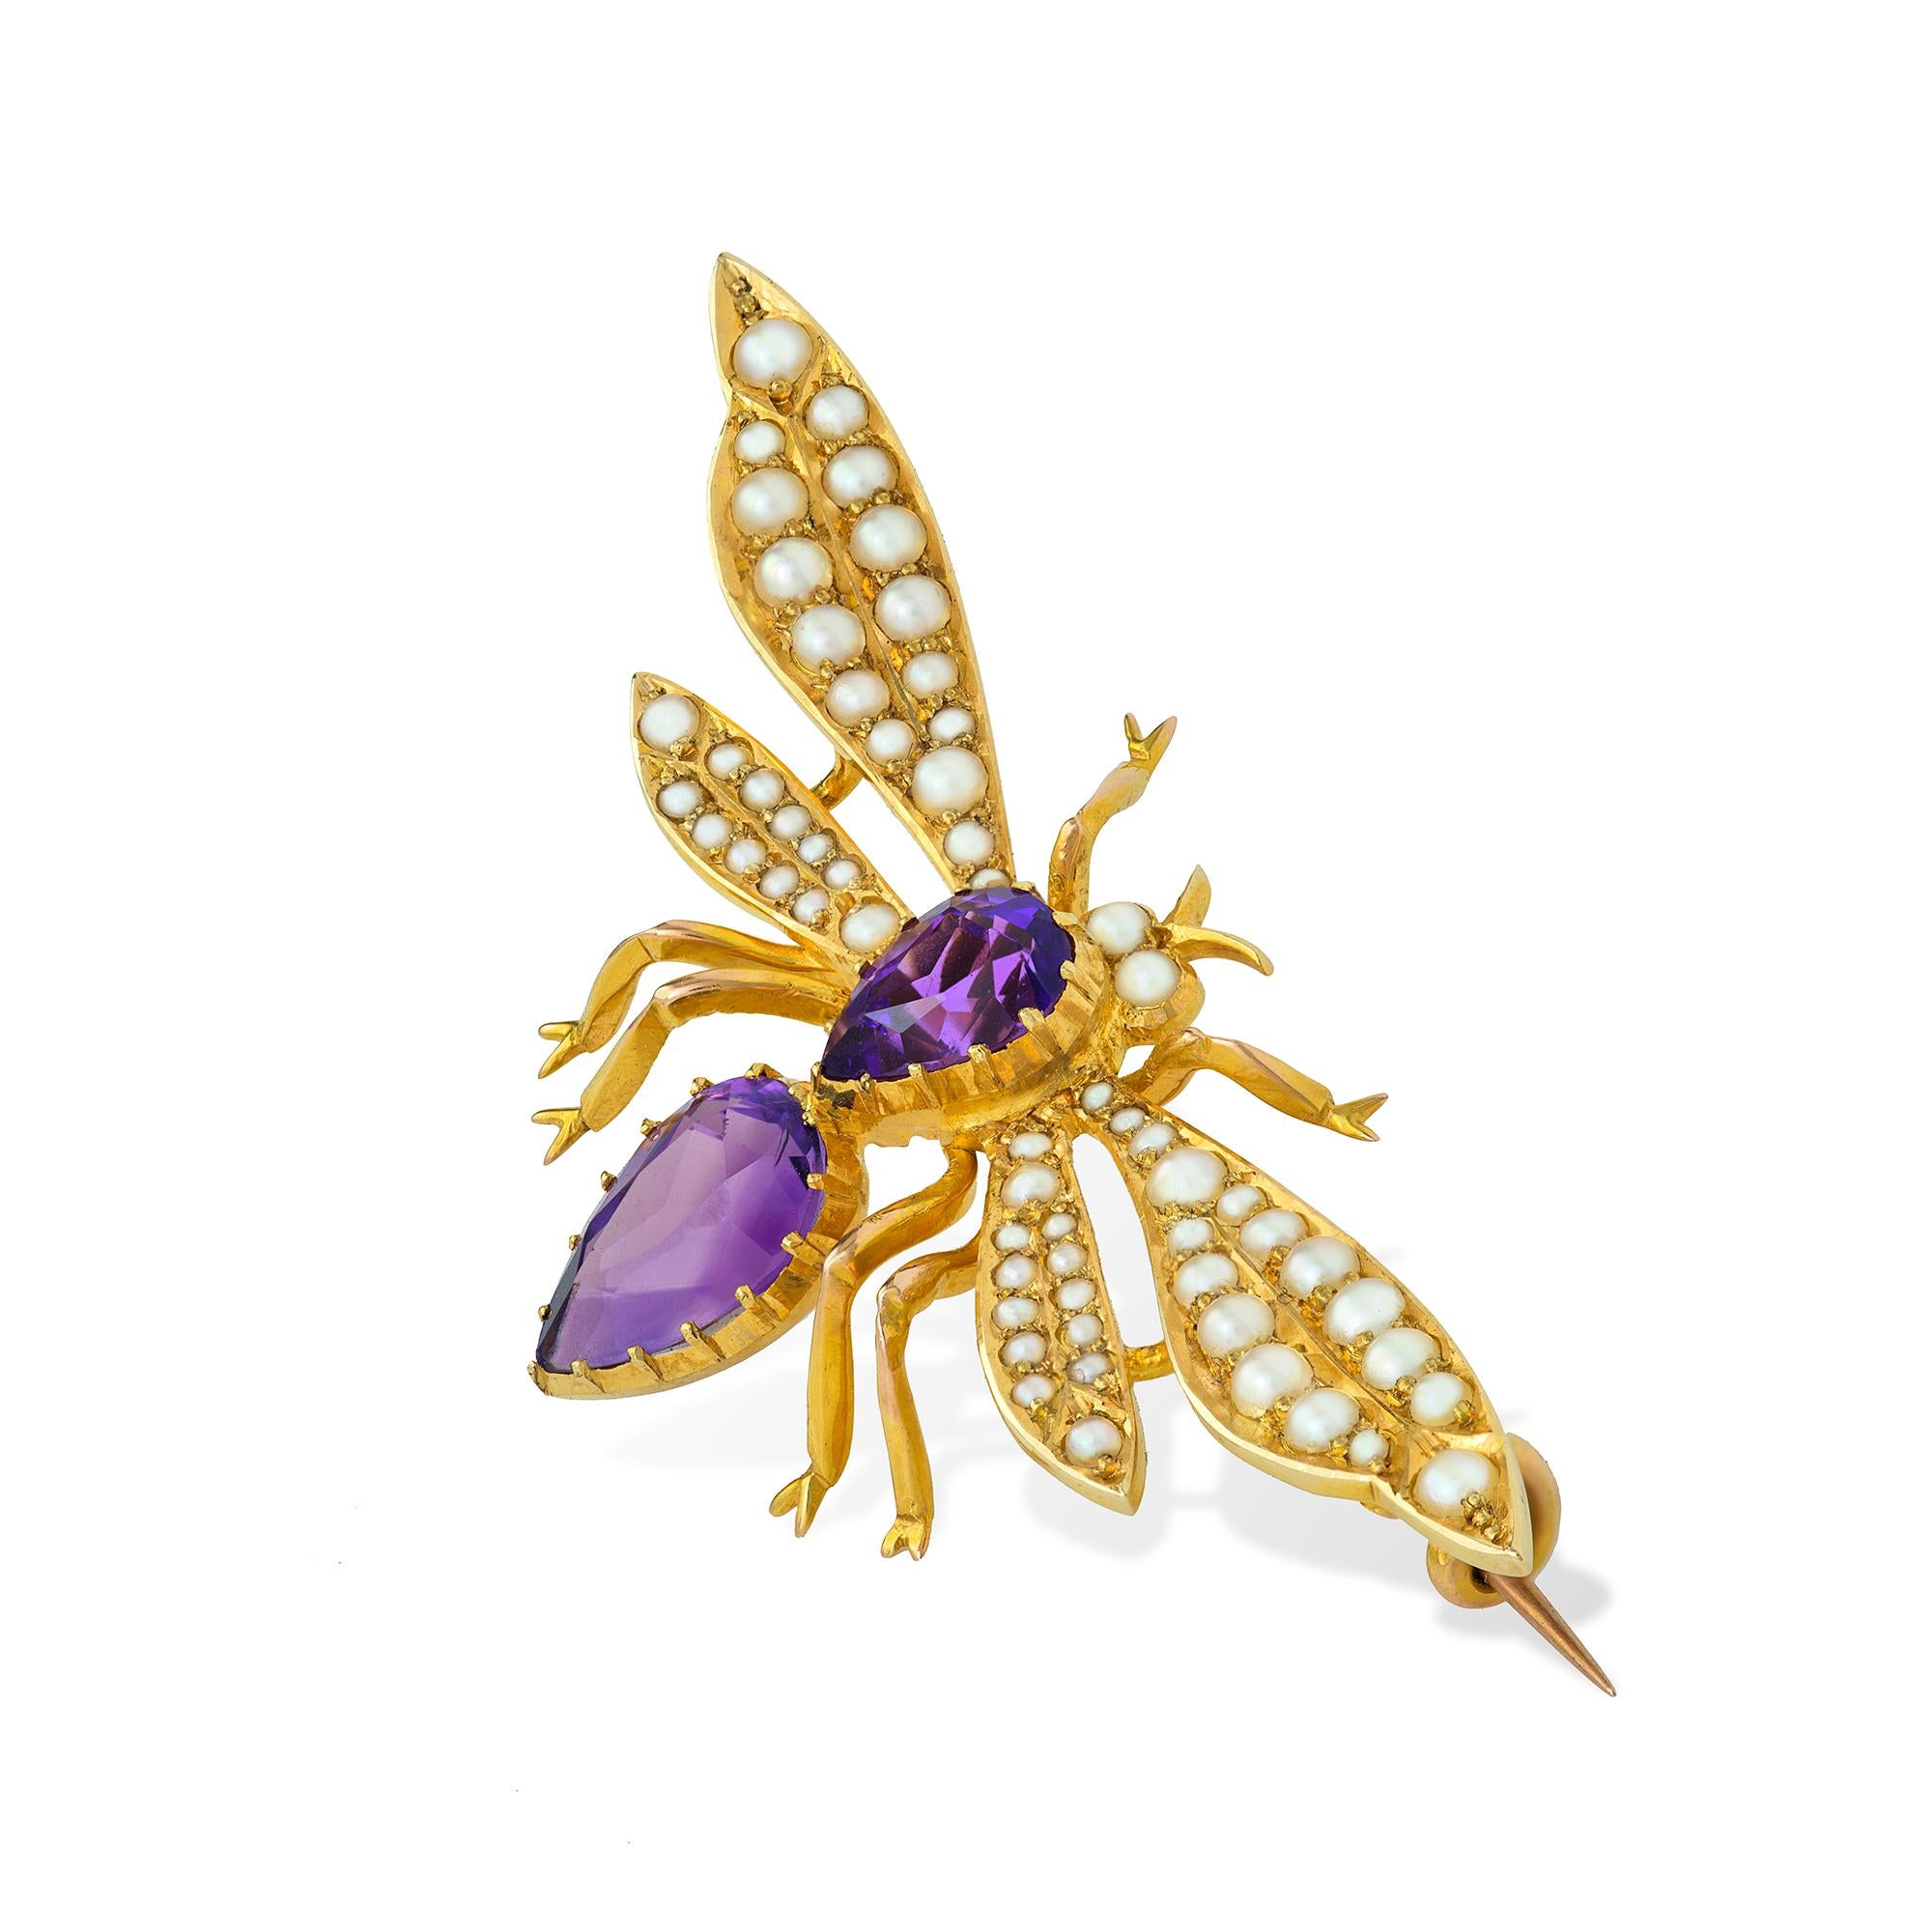 An Edwardian amethyst and pearl dragonfly brooch, with faceted amethyst-set thorax and abdomen and seed pearl set wings, the eyes set with pearls, all to a yellow gold mount, circa 1900, measuring 2.5x5.4cm, gross weight 7.5 grams.

This antique